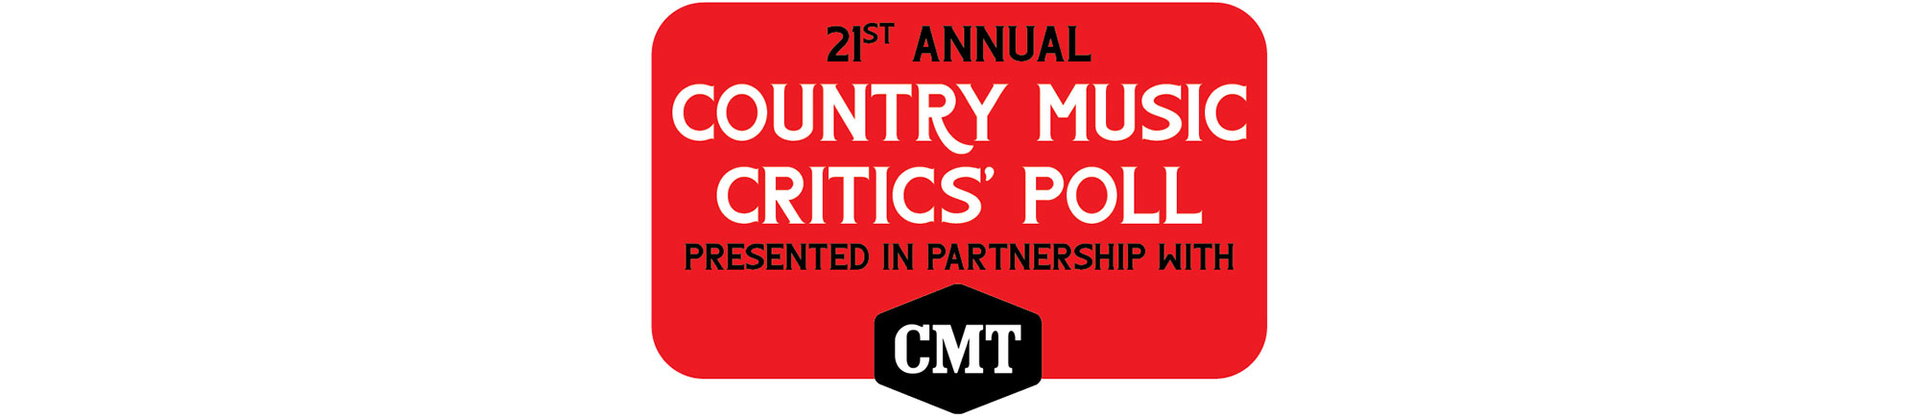 21st Annual Country Music Critics’ Poll: The Results